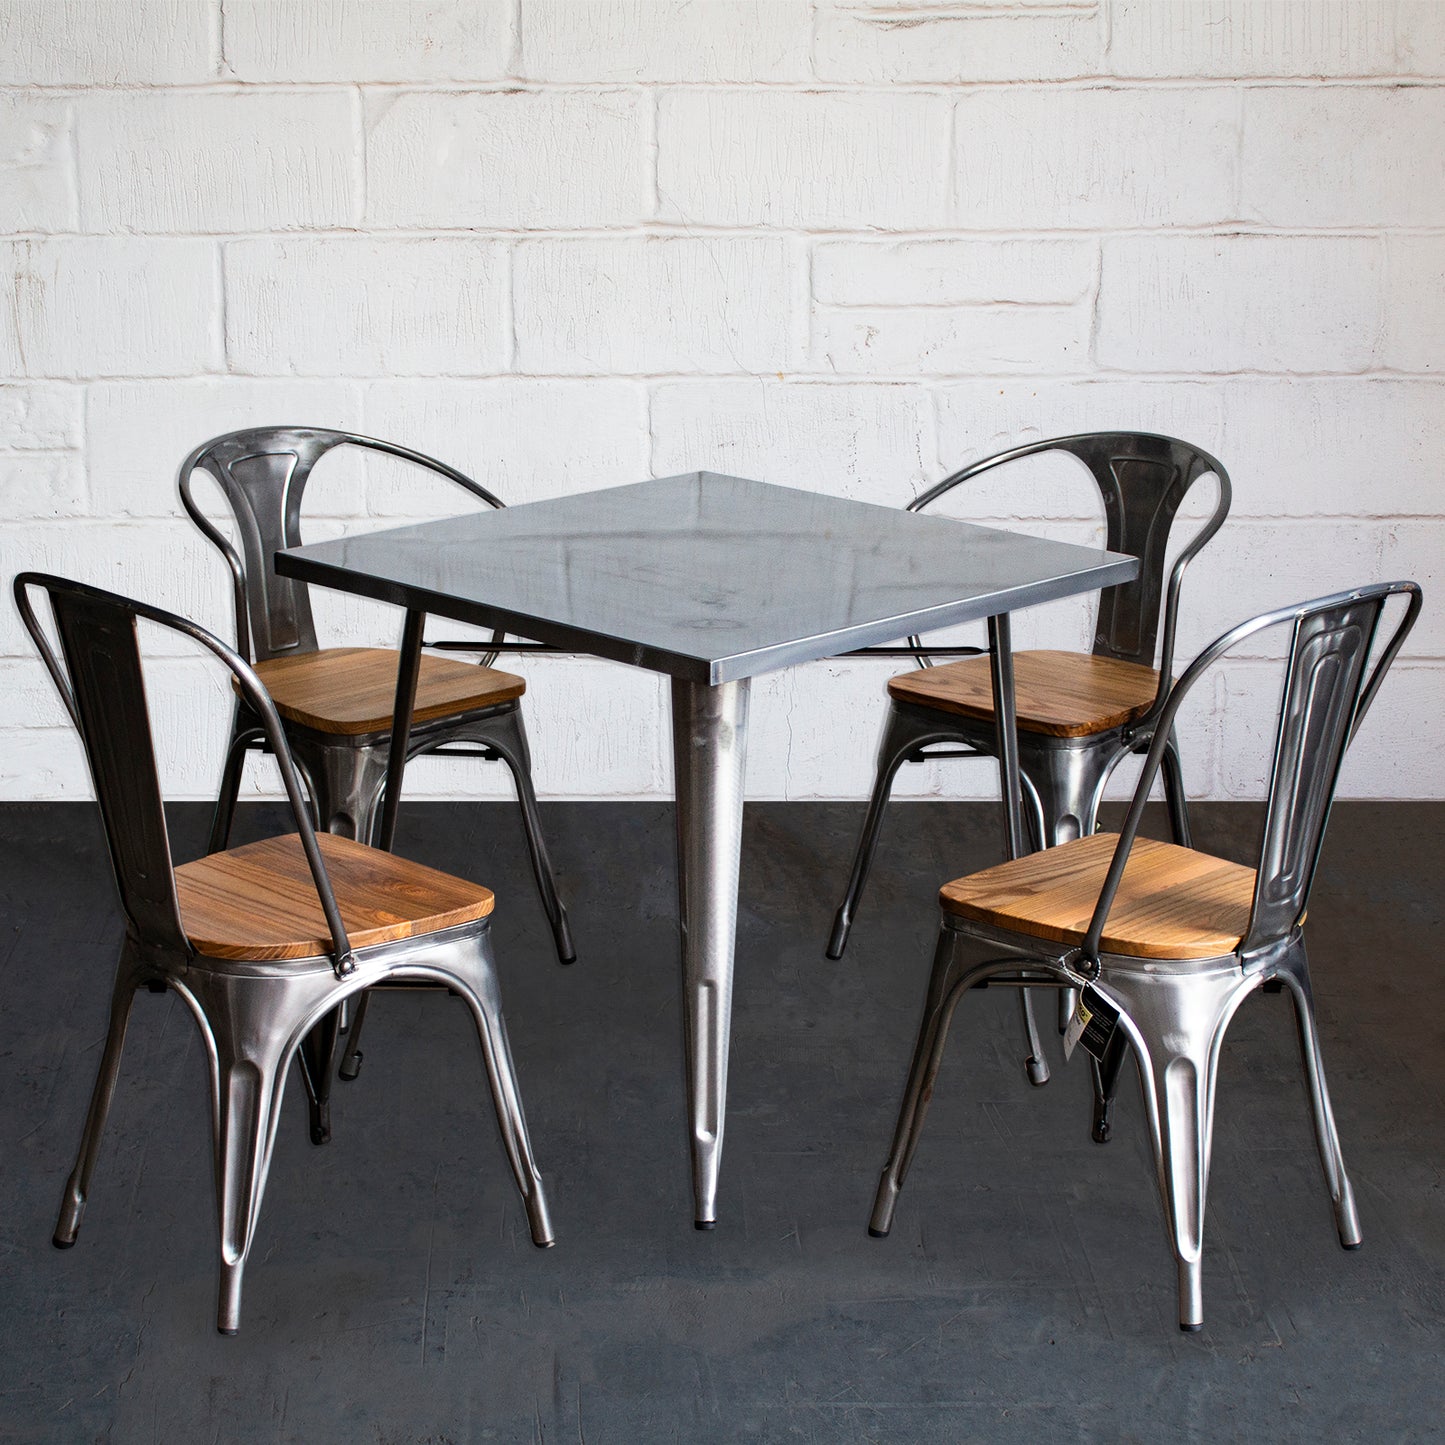 5PC Belvedere Table Florence & Palermo Chairs Set - Steel